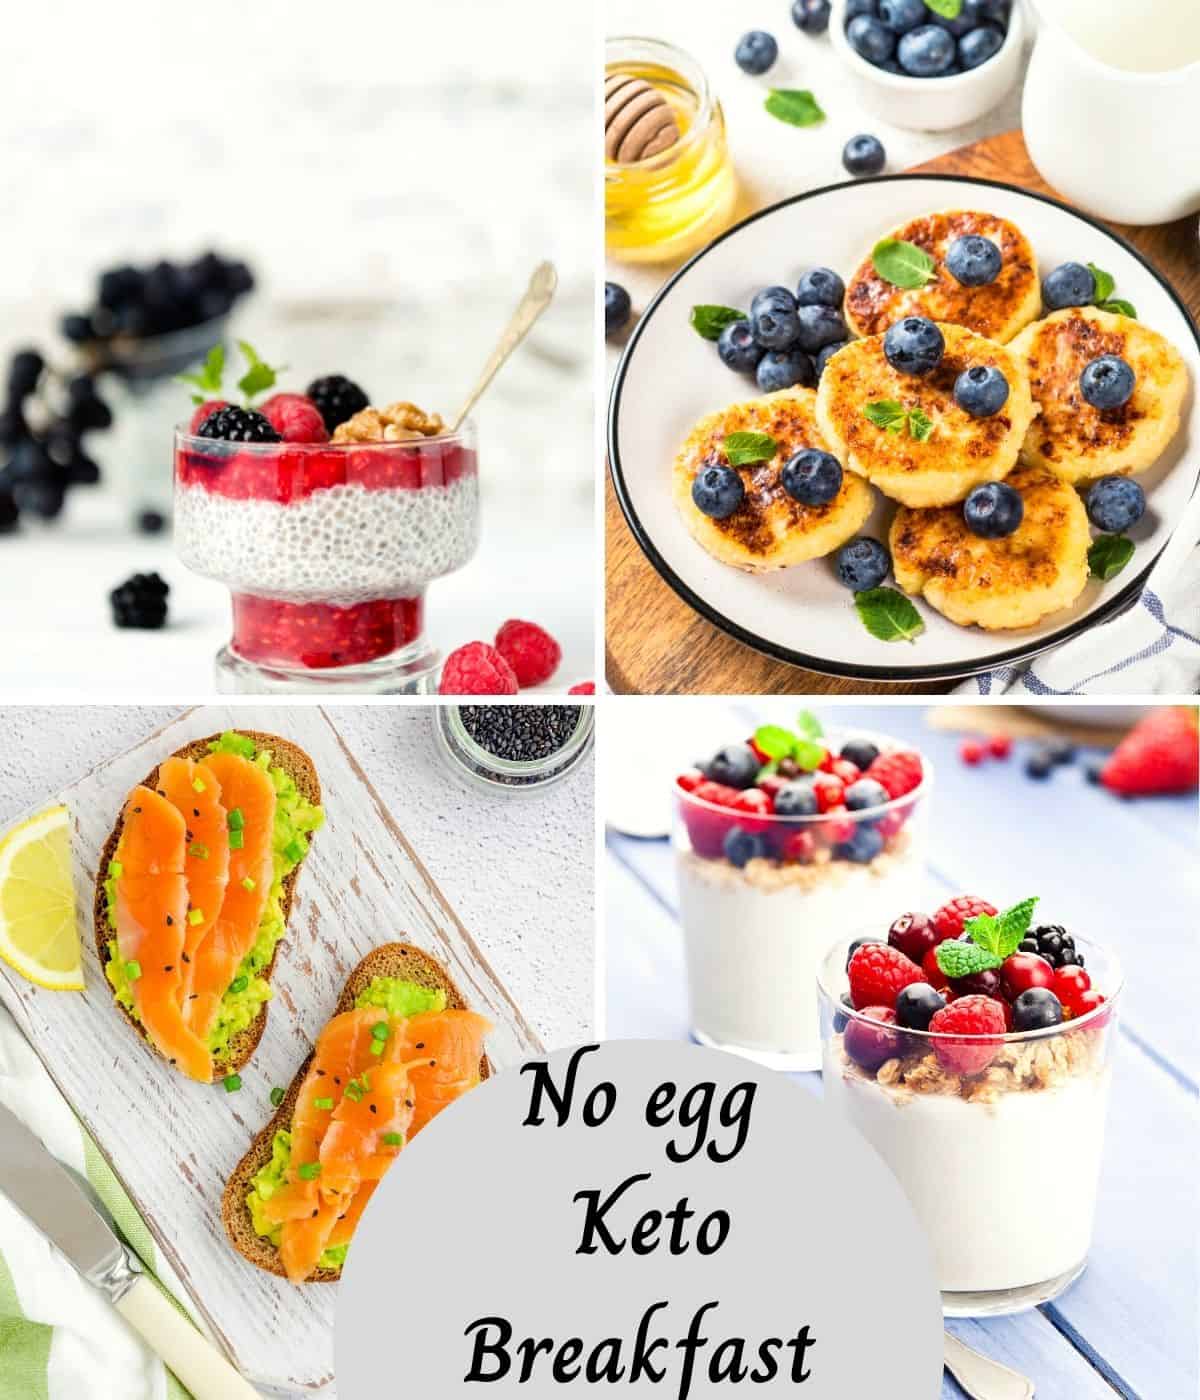 low carb breakfast recipes in a collage for a keto diet that are egg free